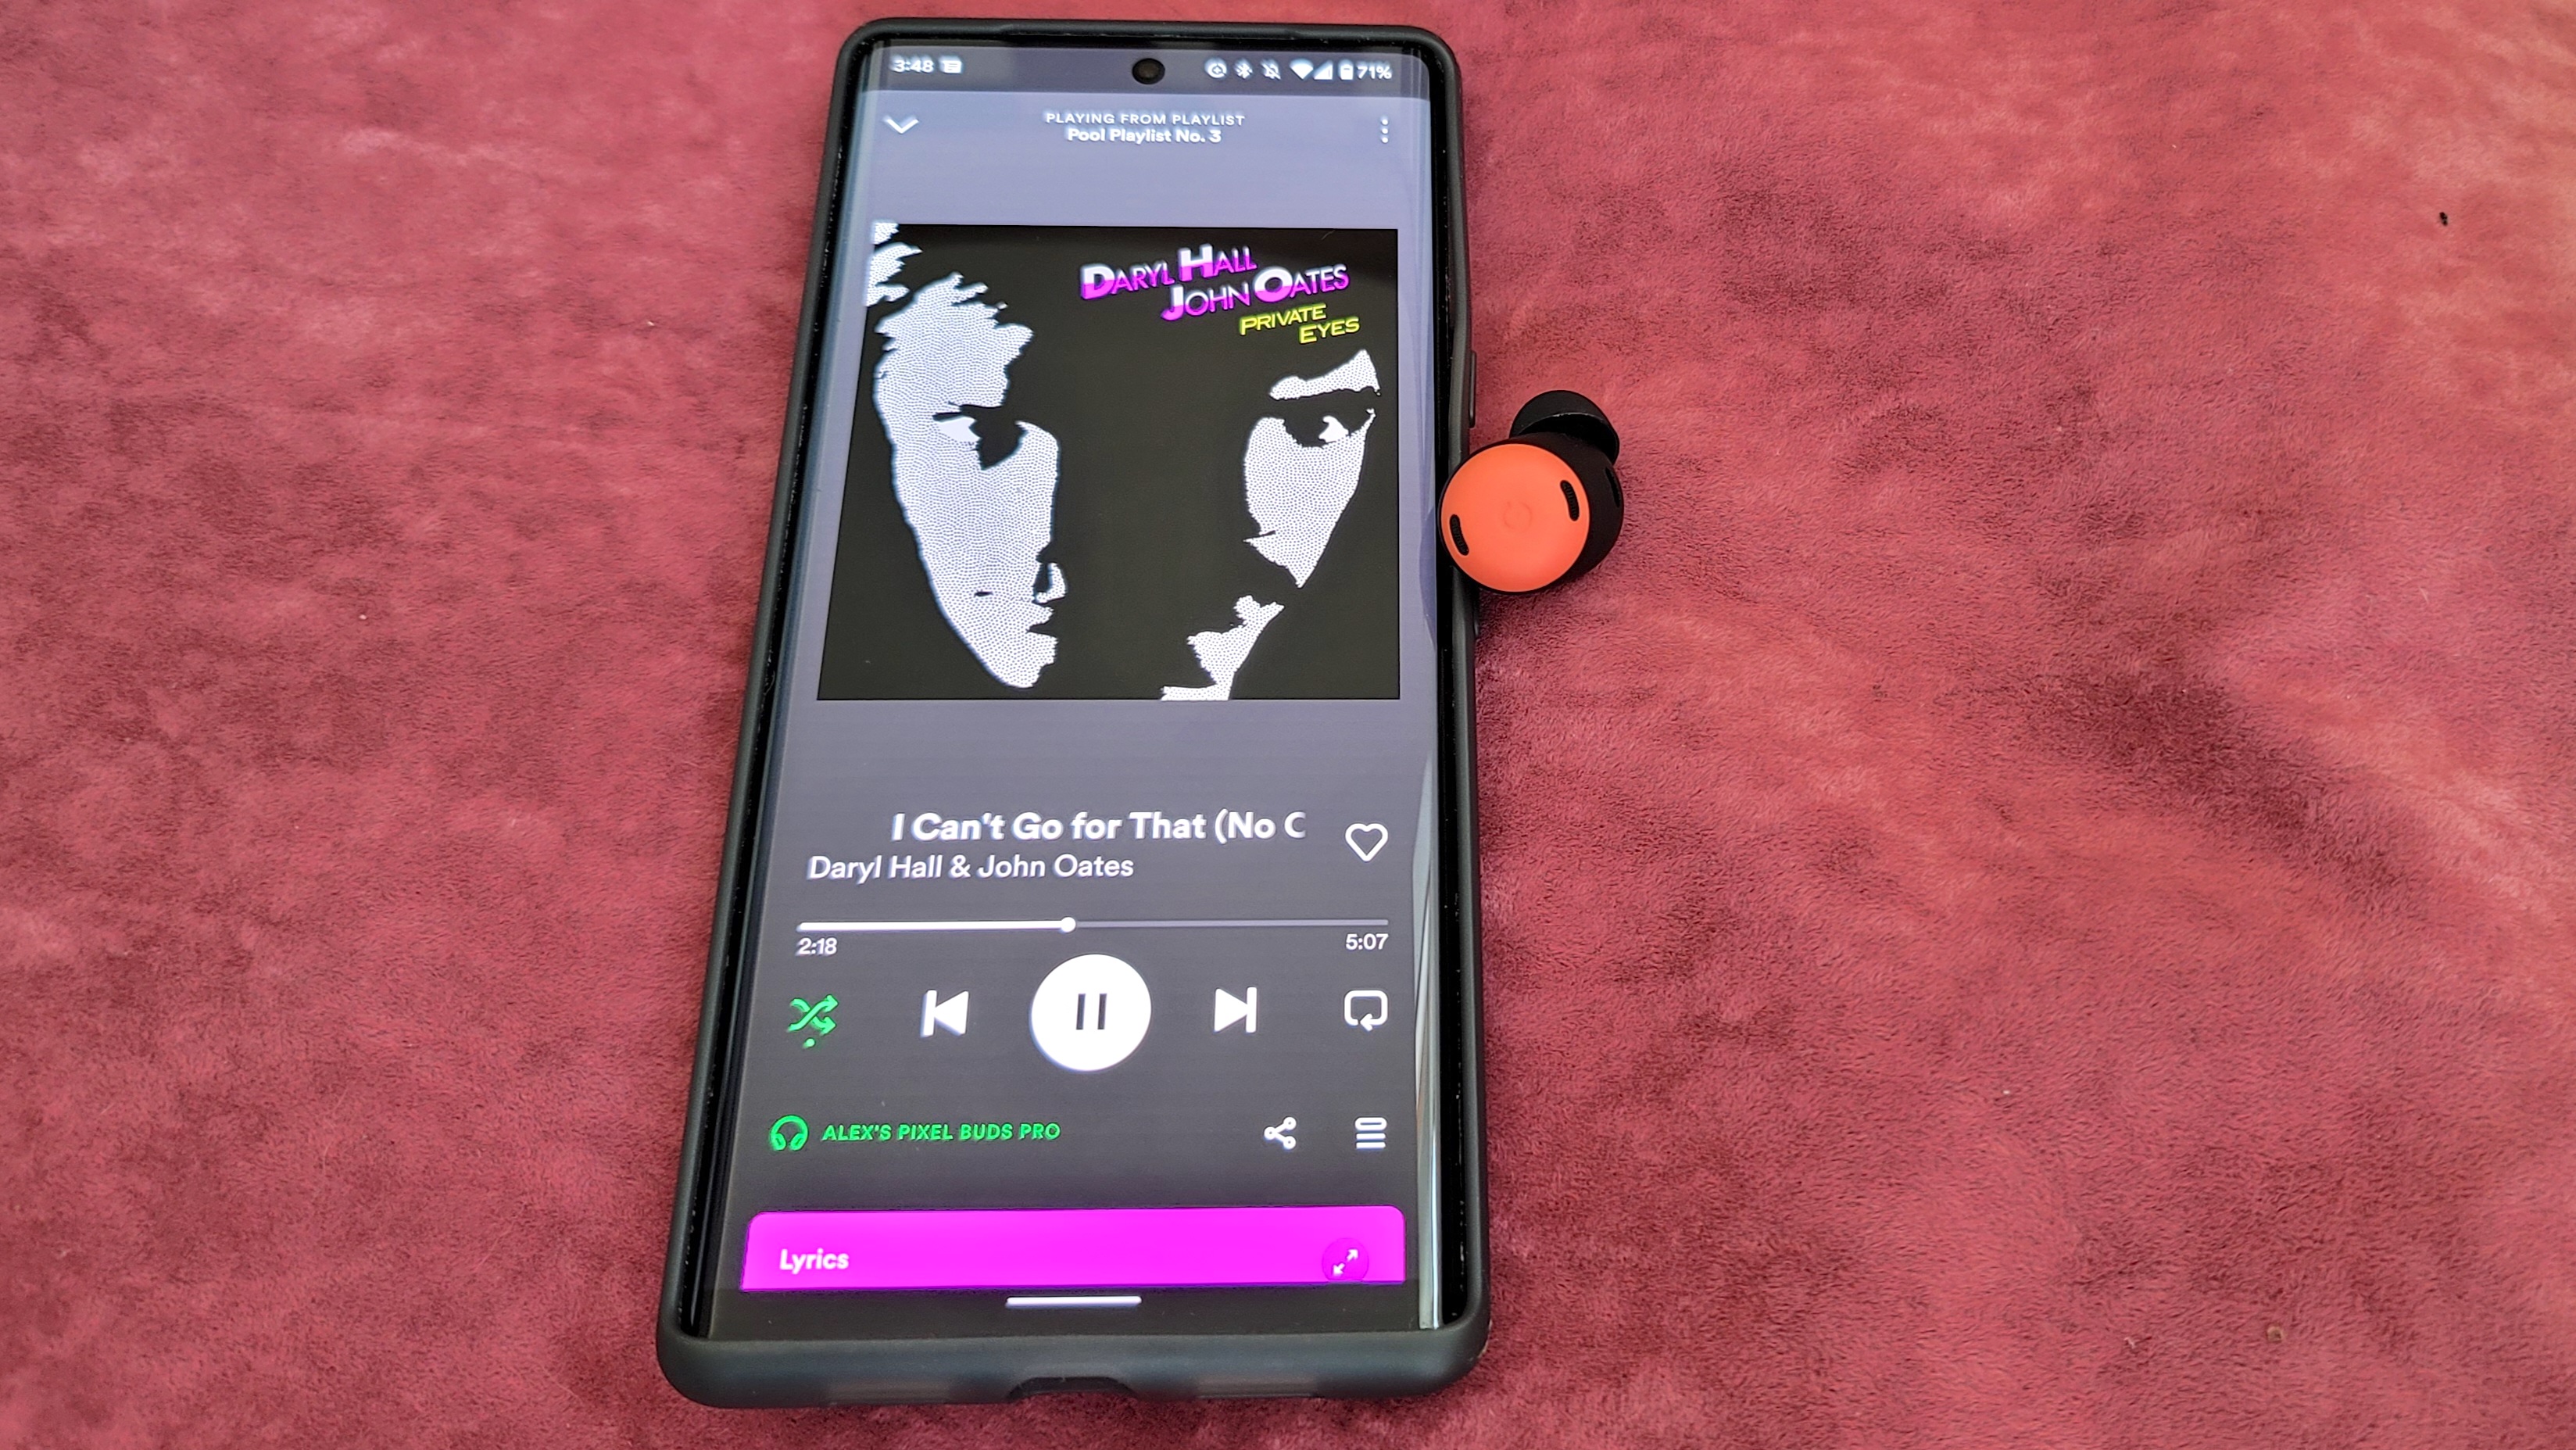 The Google Pixel Buds Pro playing Hall & Oates "I Can't Go For That (No Can't Do)" during our testing